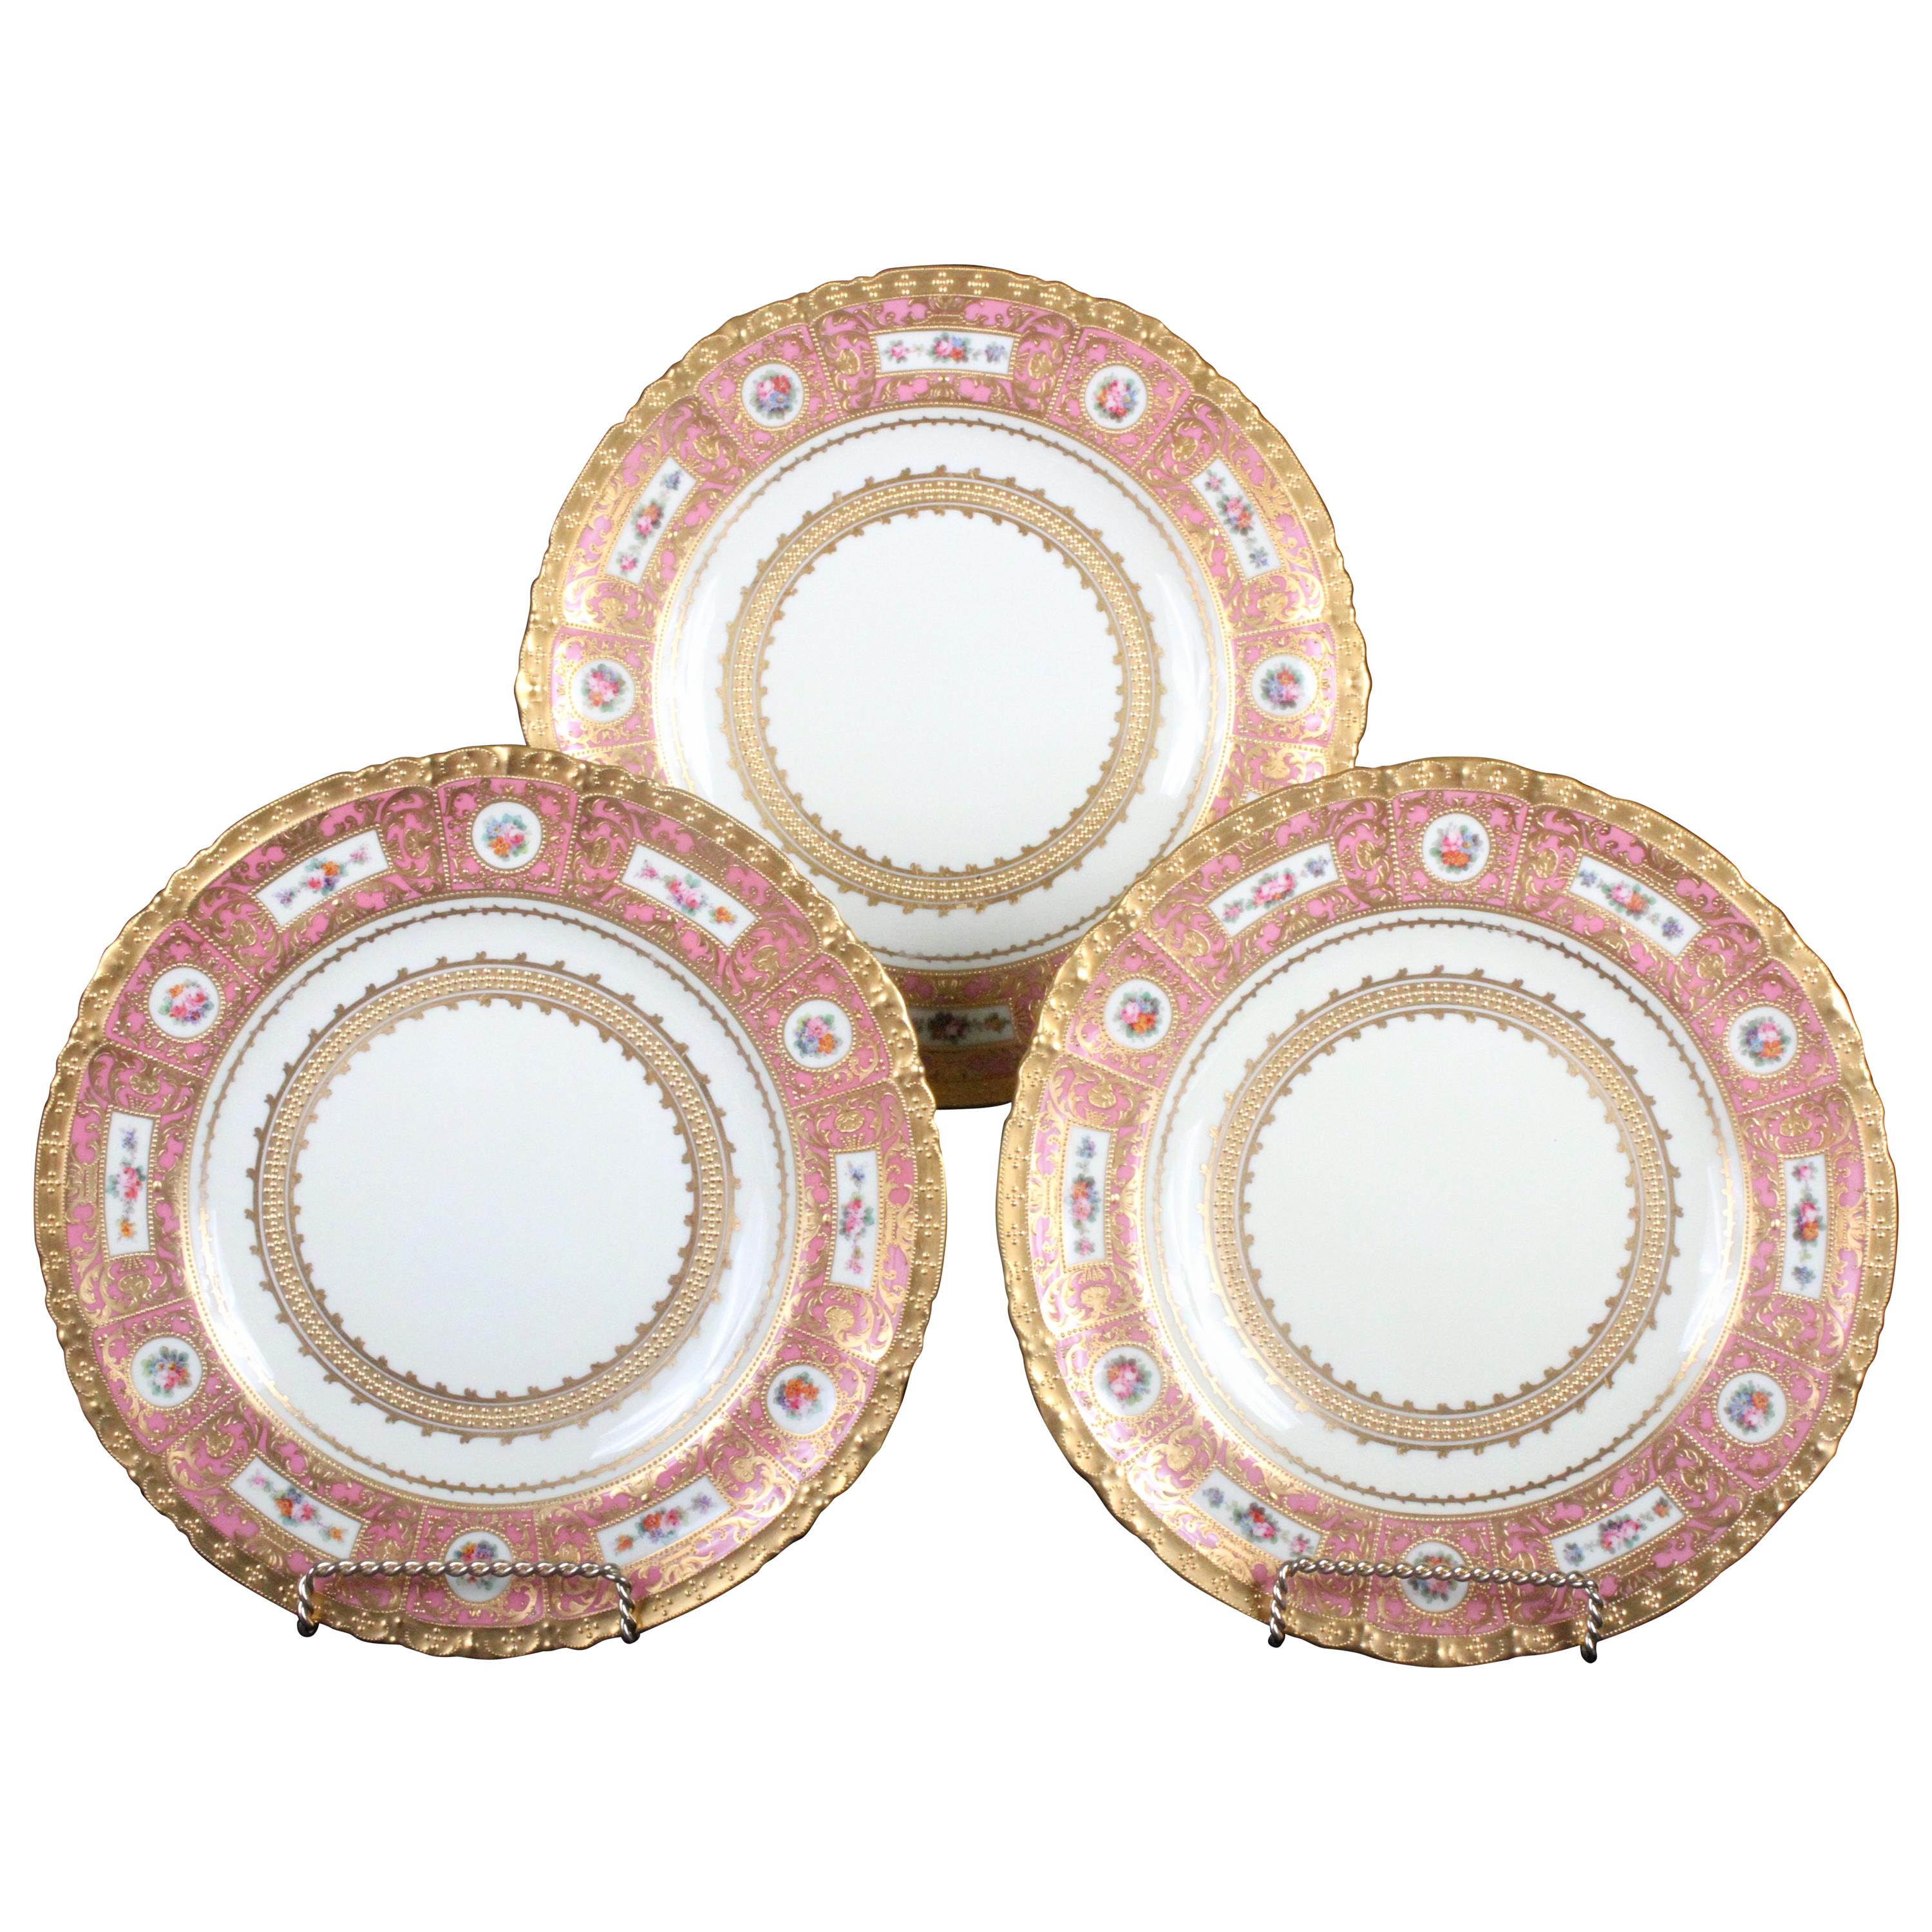 11 Derby for Tiffany Hand Painted and Gilded Pink Service Plates im Angebot